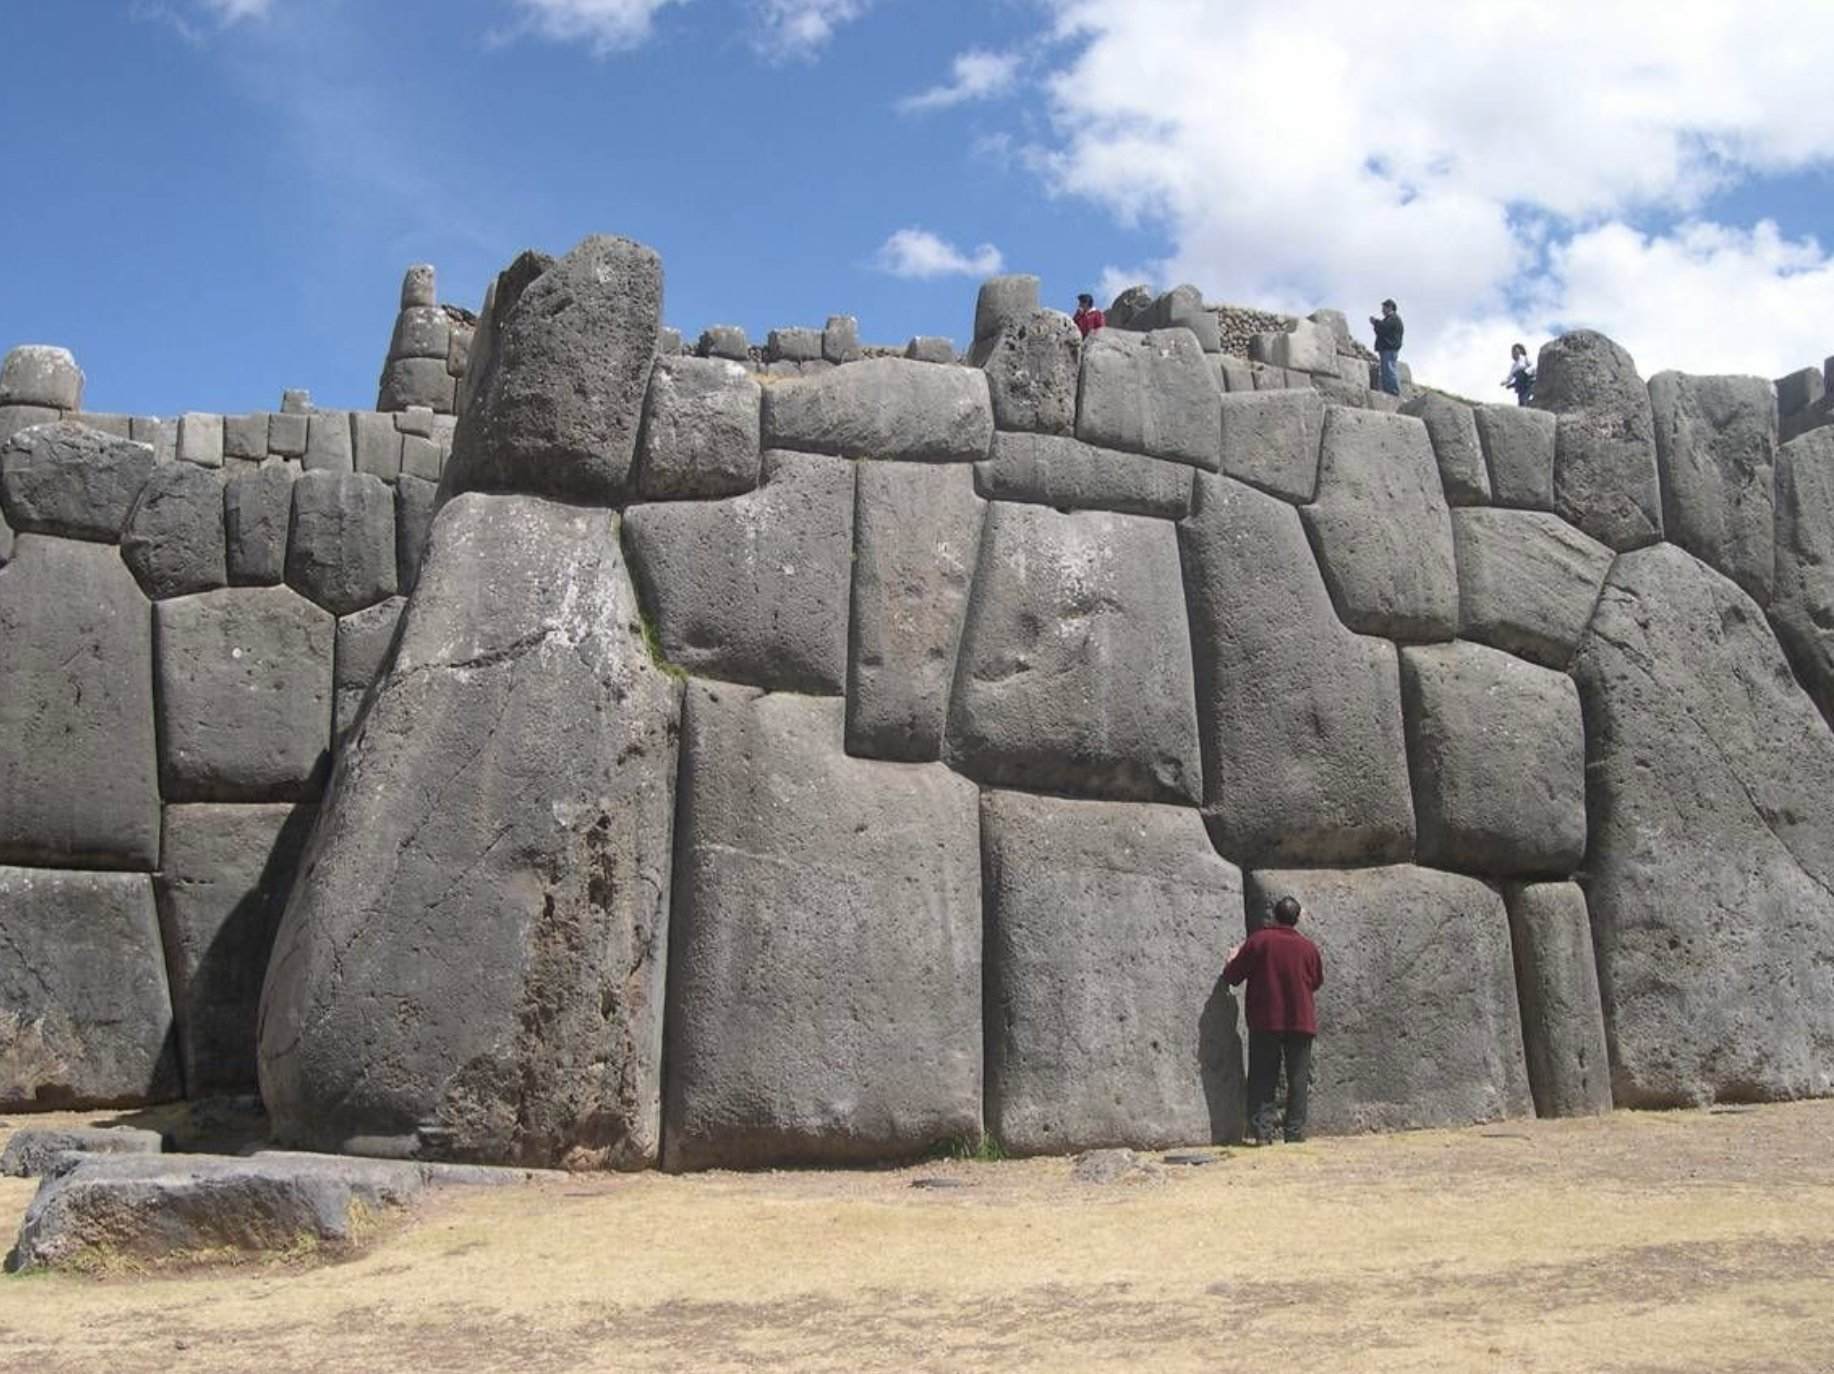 Could ancient Peruvians really know how to melt stone blocks? 3